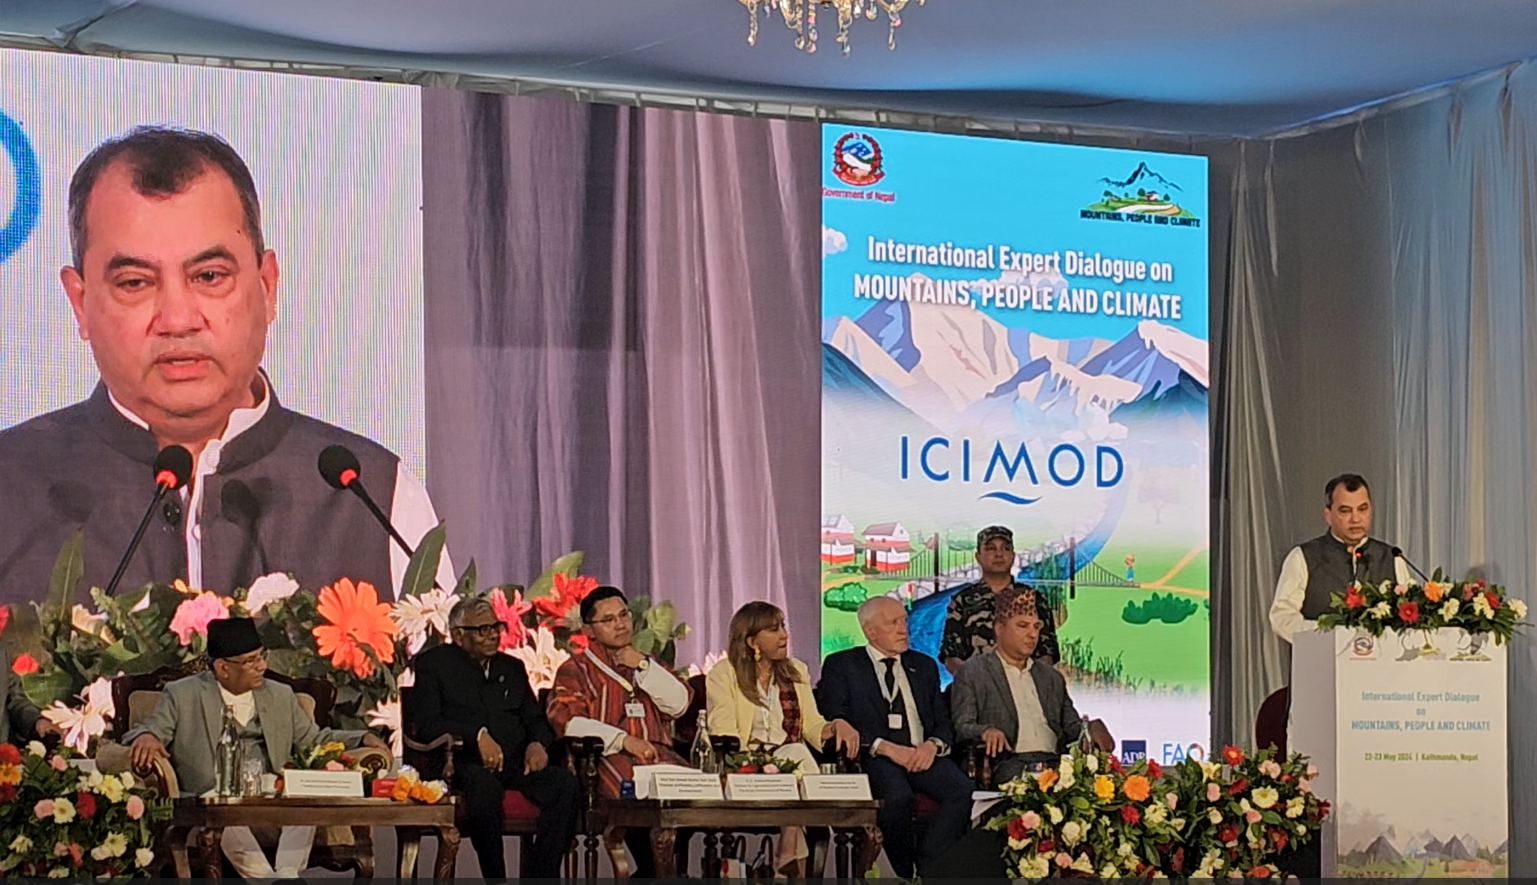 B'desh Environment Minister Chowdhury urges unity among vulnerable countries to combat climate change